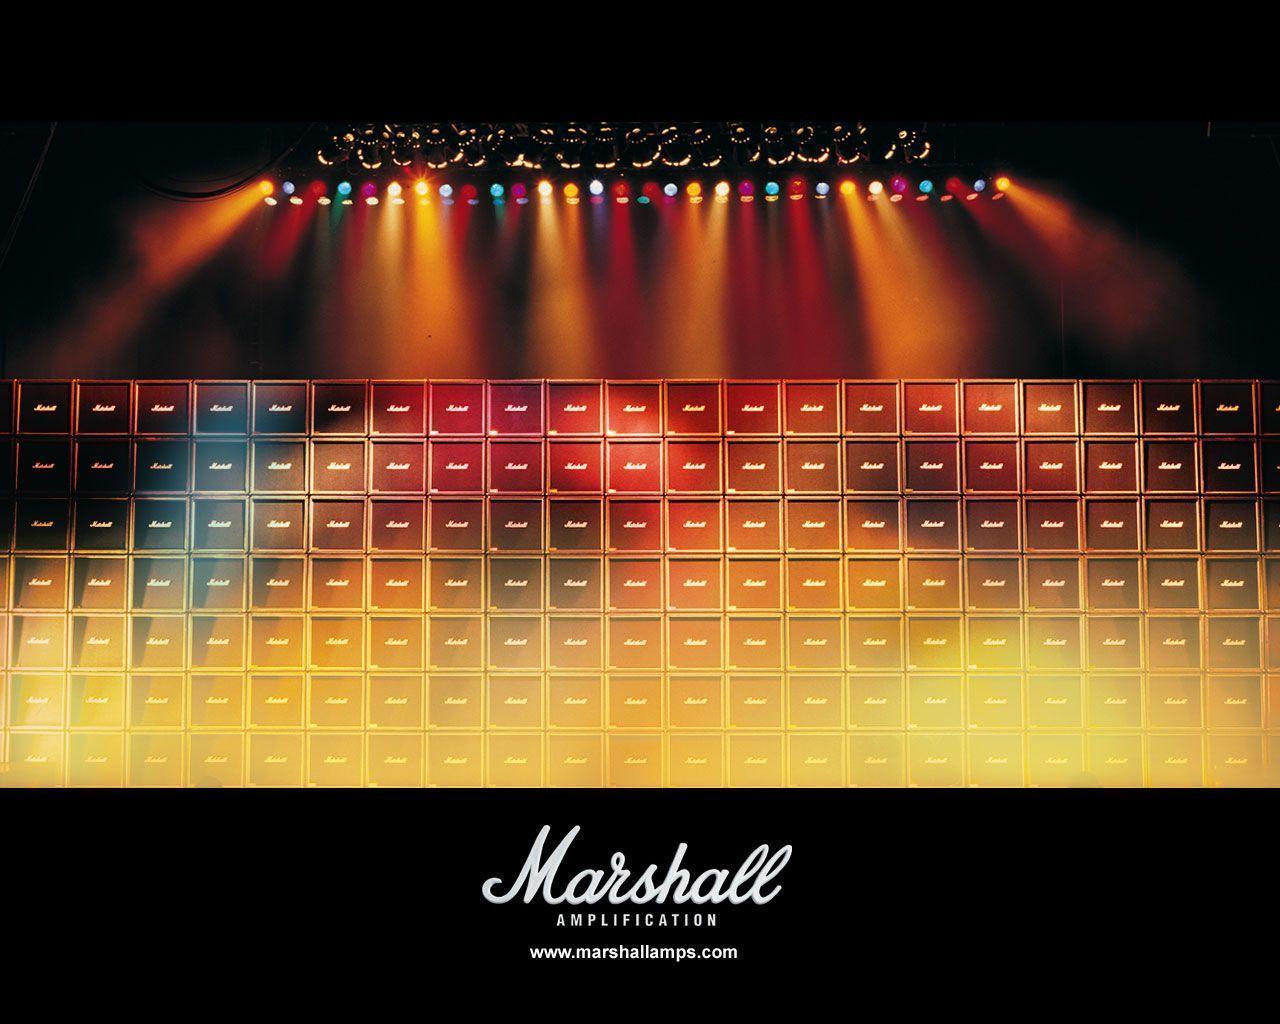 best image about Marshall amps